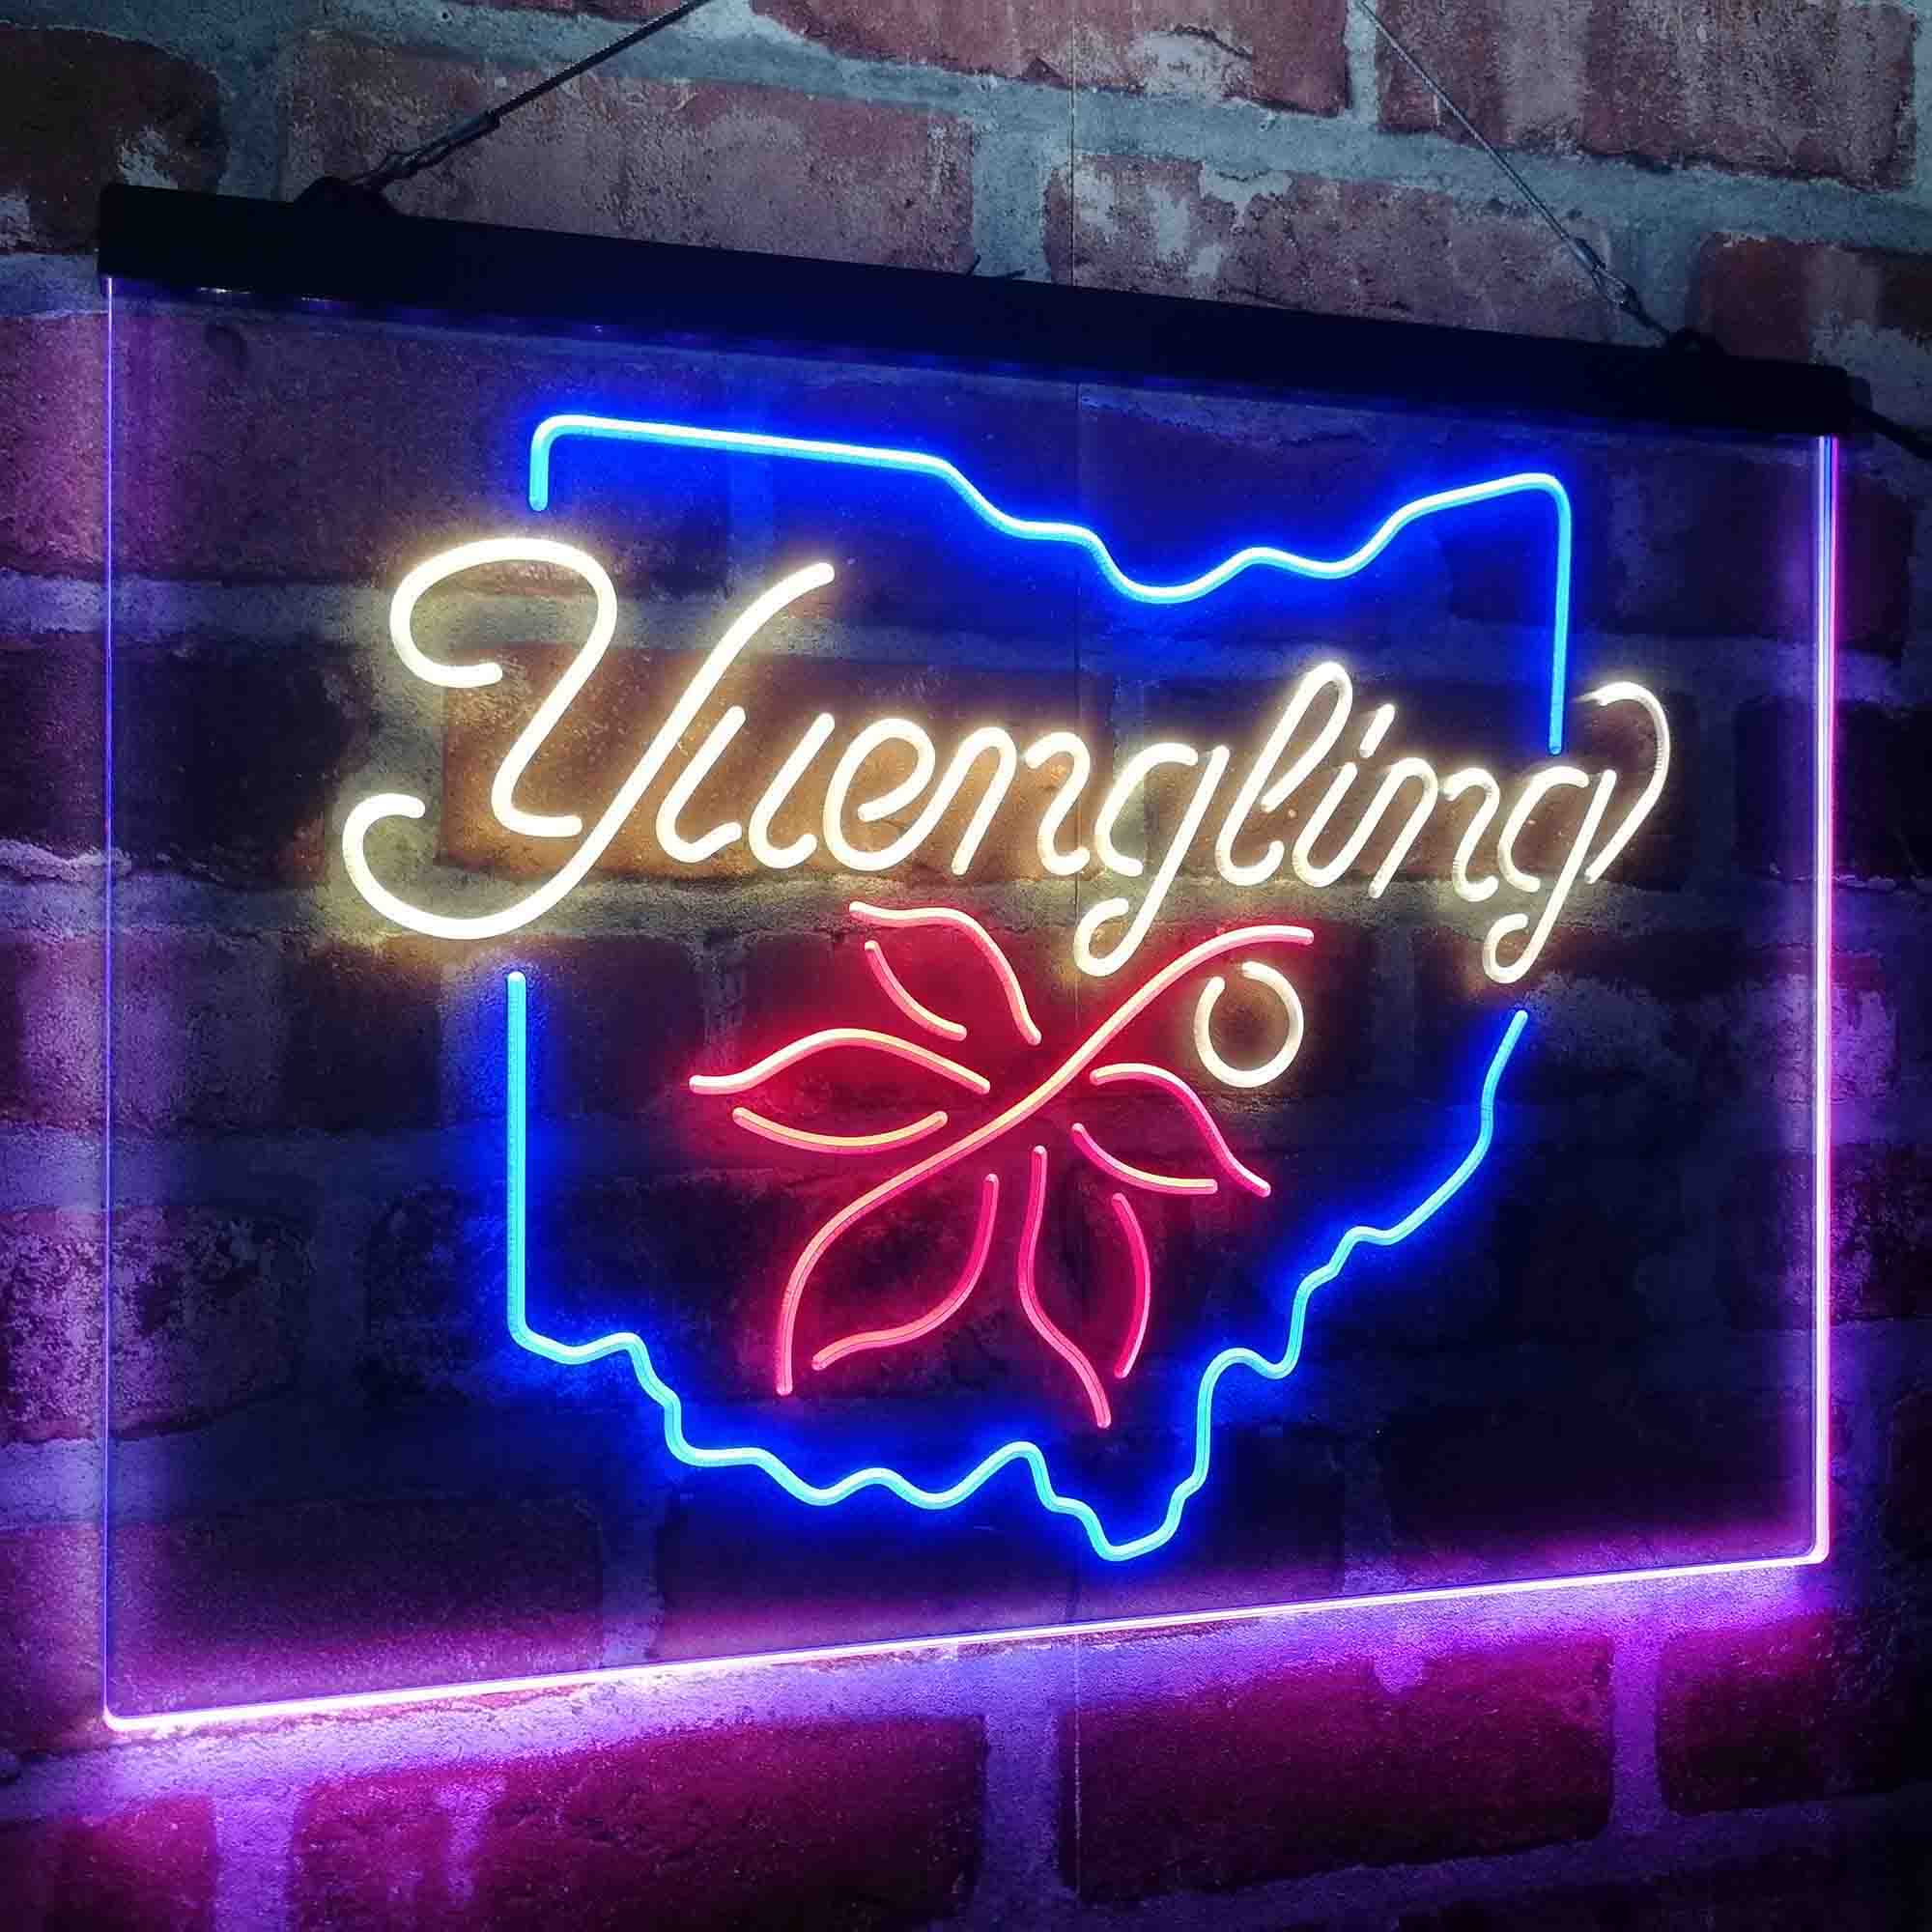 Yuengling Ohio State Buckeye Larger Beer Neon LED Sign 3 Colors